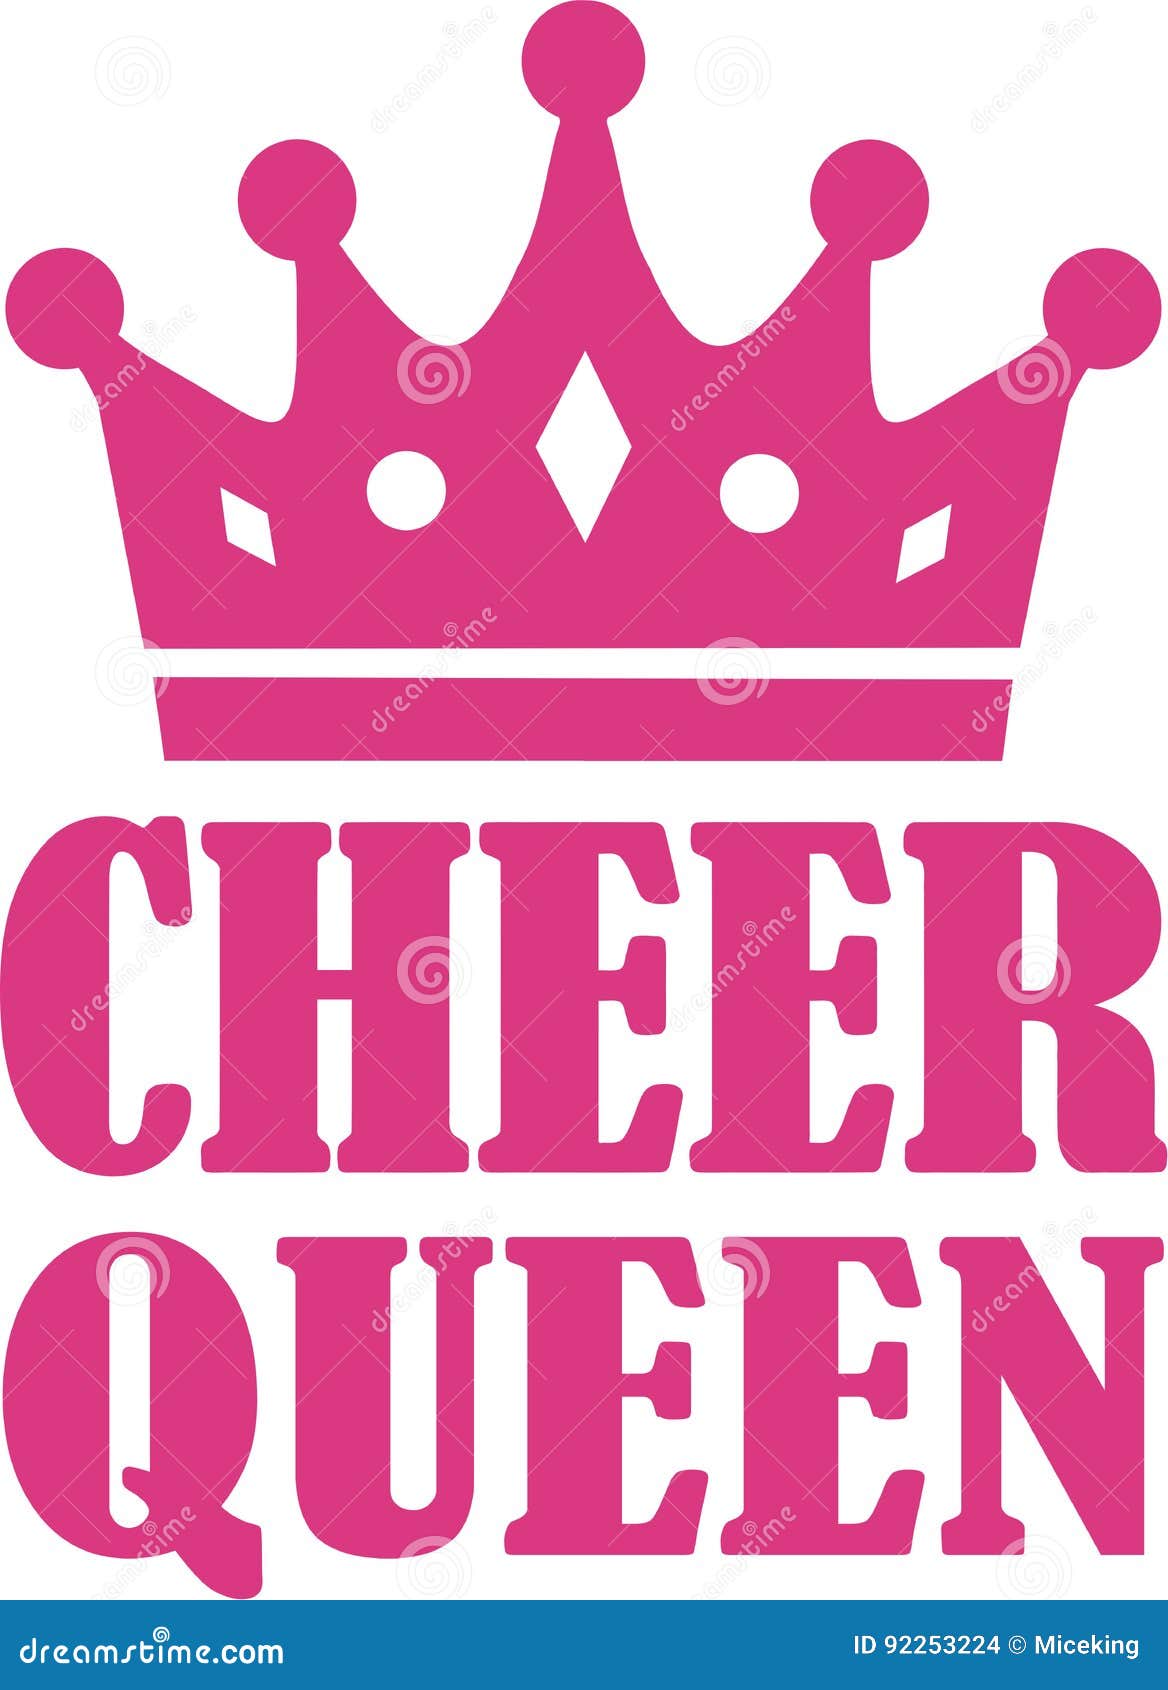 cheer queen with crown